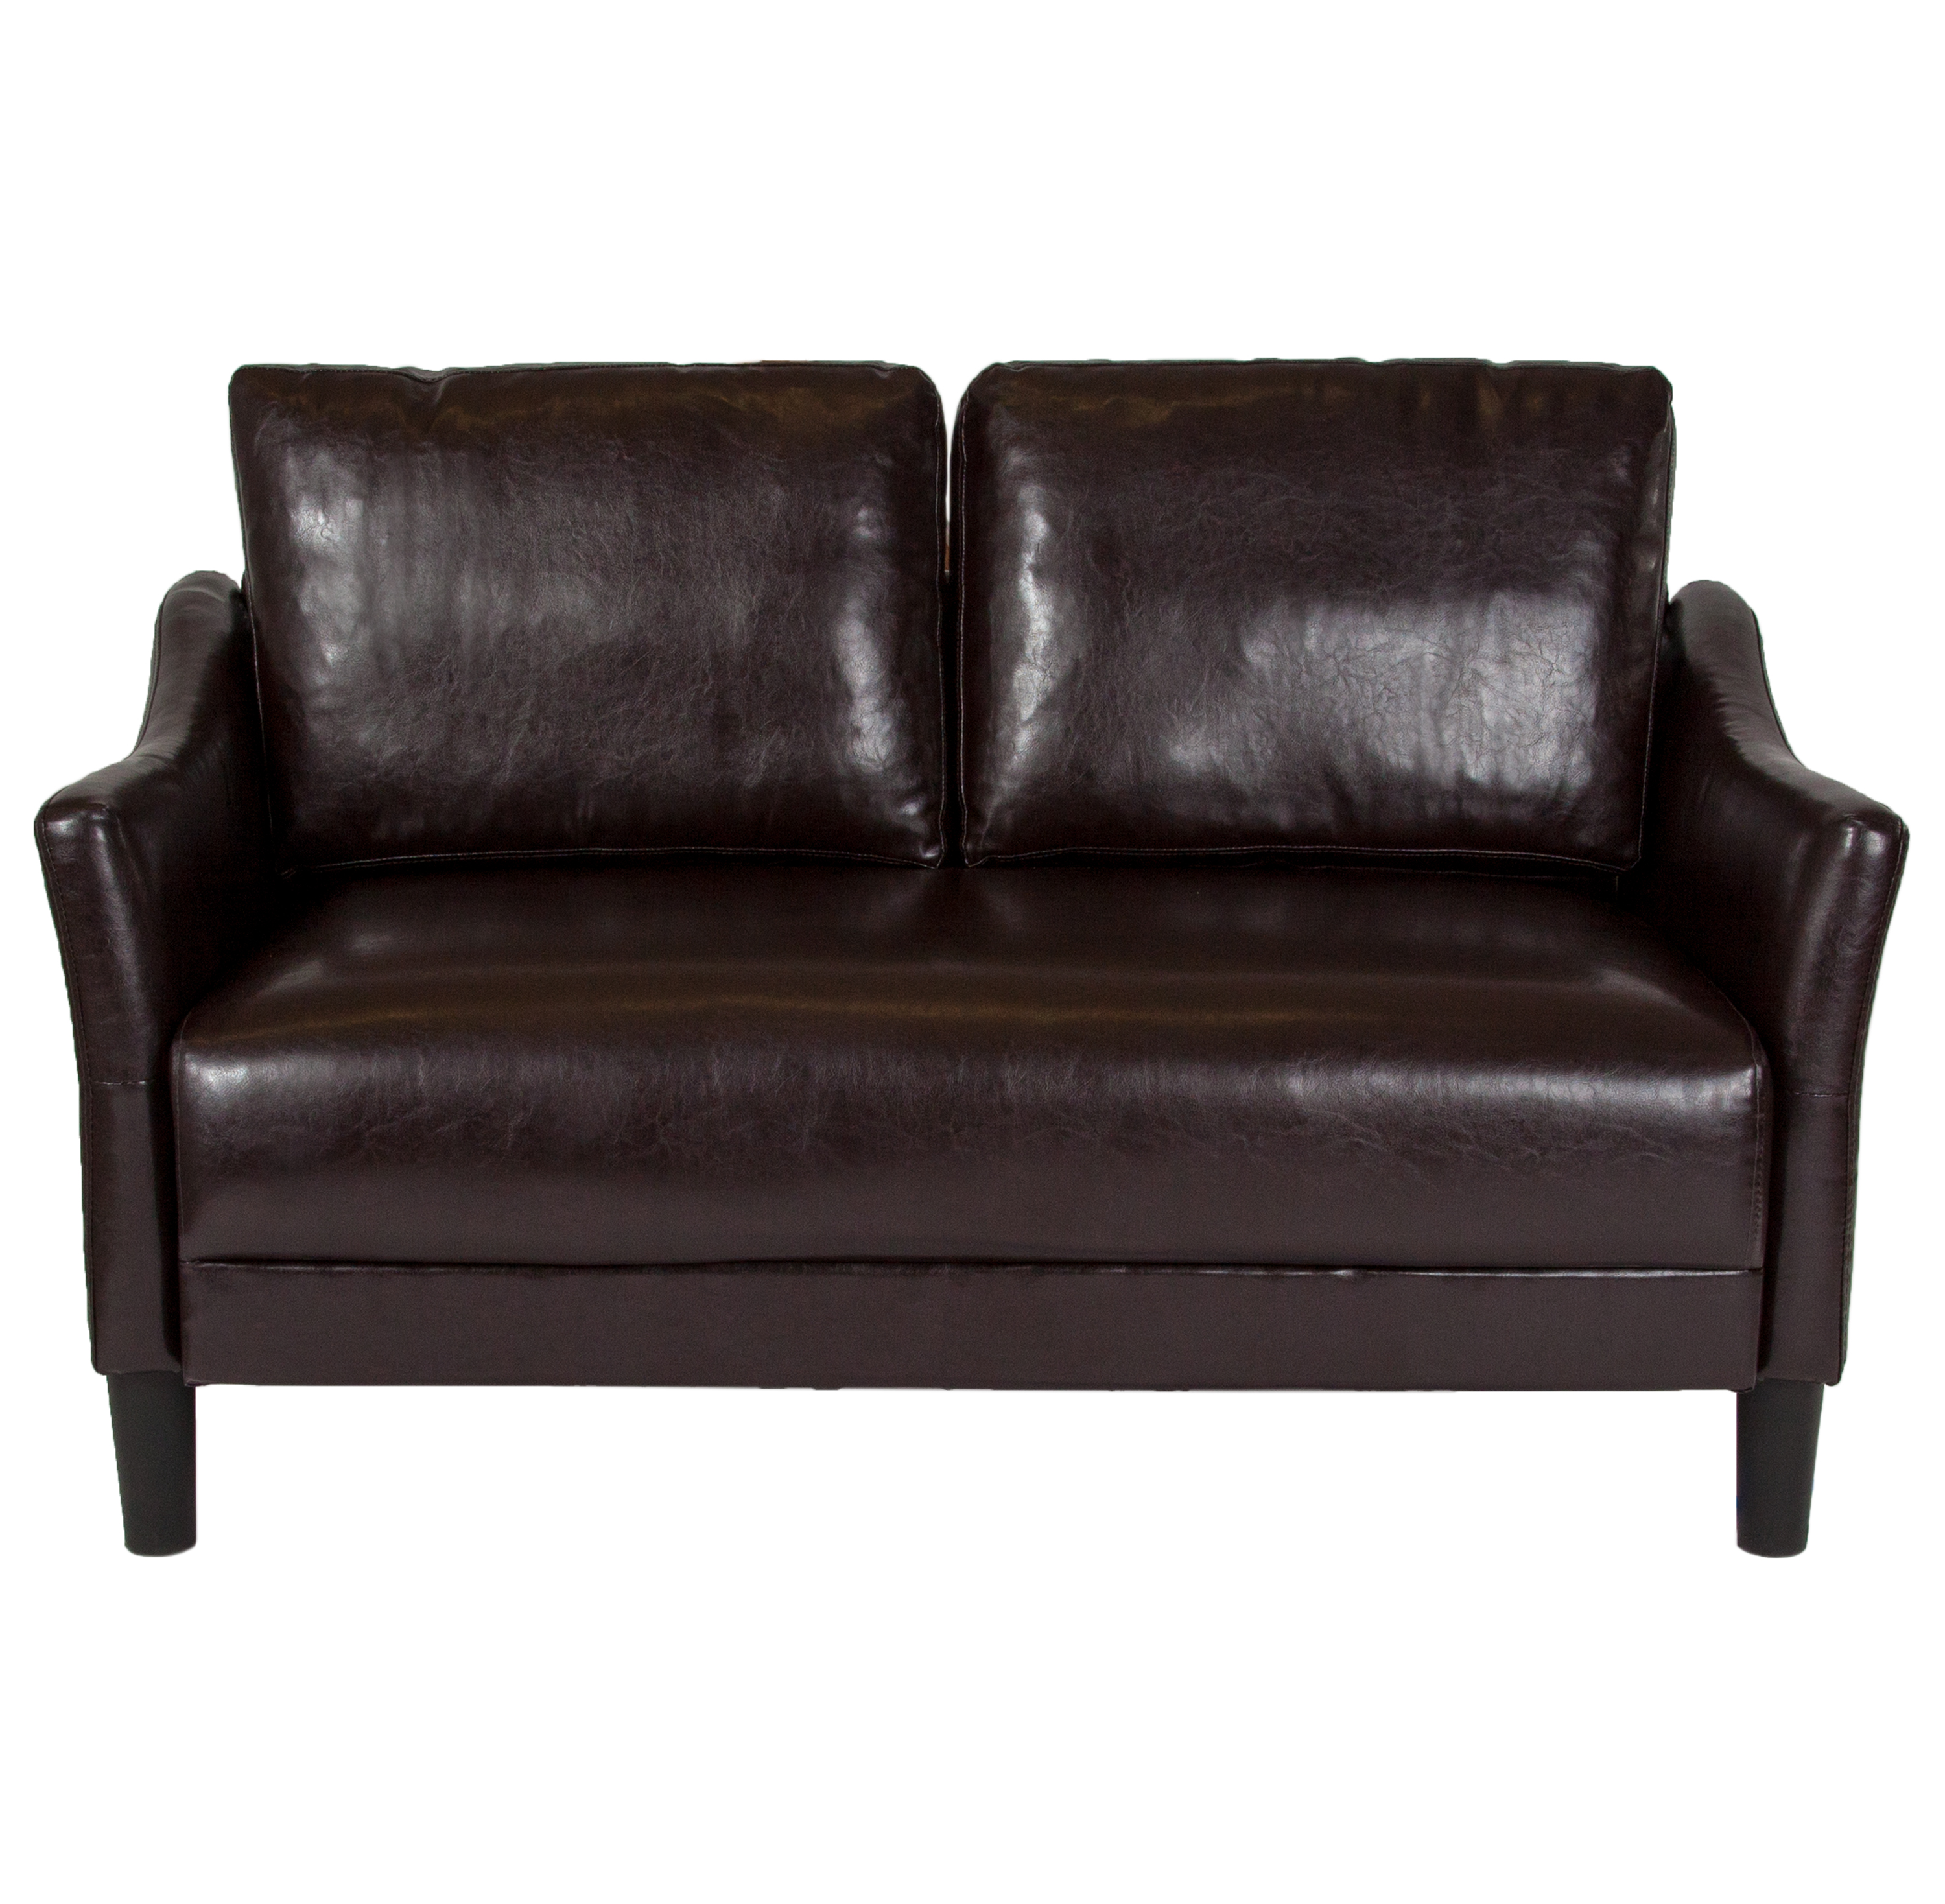 Flash Furniture Asti Upholstered Loveseat in Brown LeatherSoft - image 5 of 5